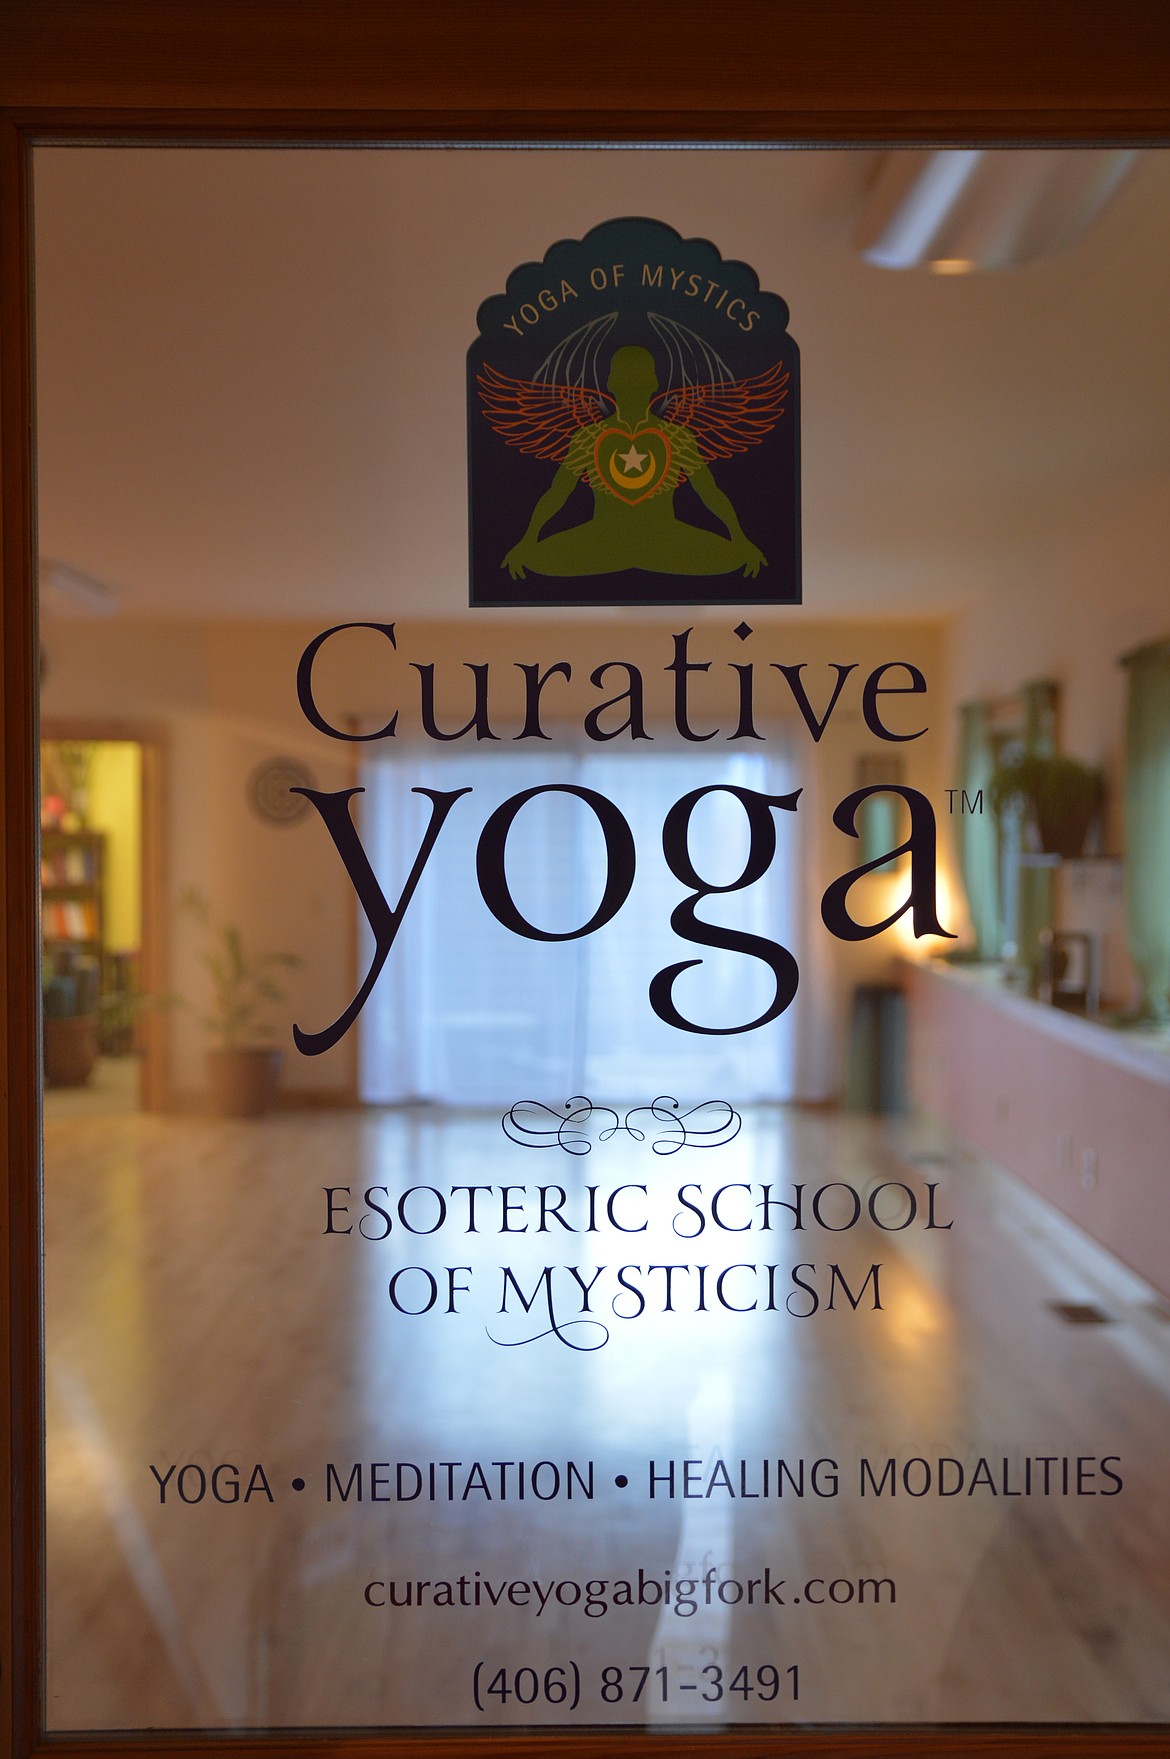 The front door at Curative Yoga in Bigfork. (Courtesy photo)